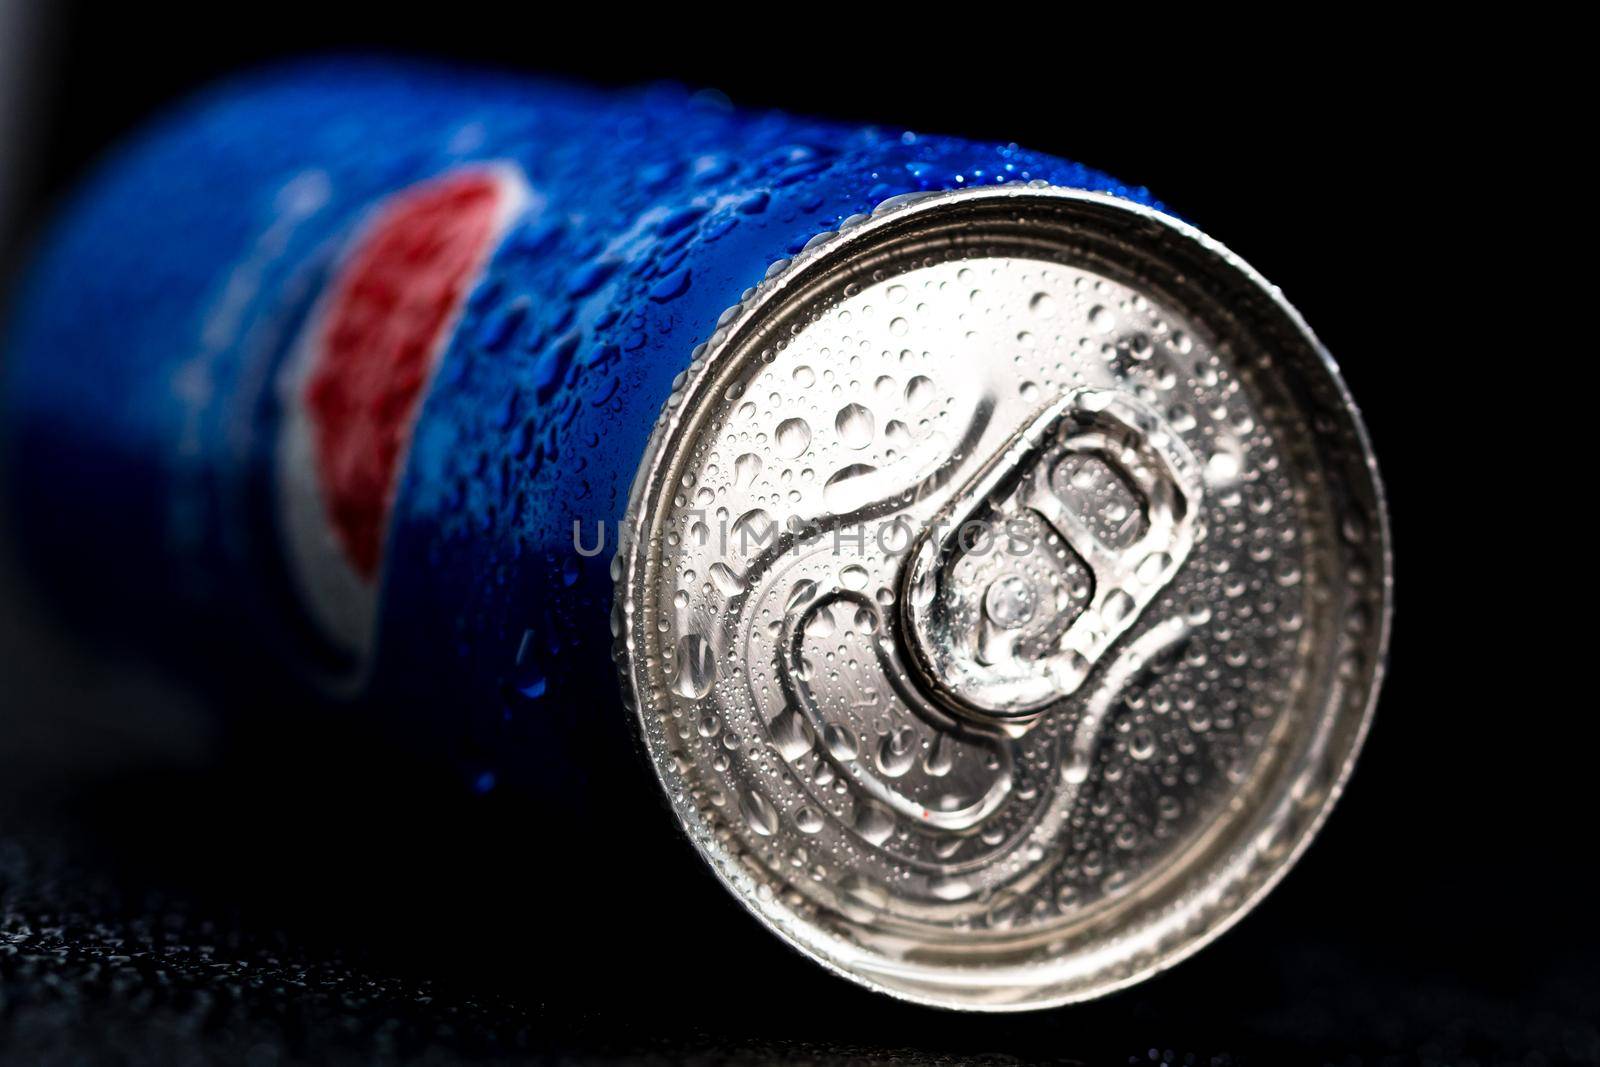 Editorial photo of Pepsi can with water droplets on black background. Studio shot in Bucharest, Romania, 2021 by vladispas